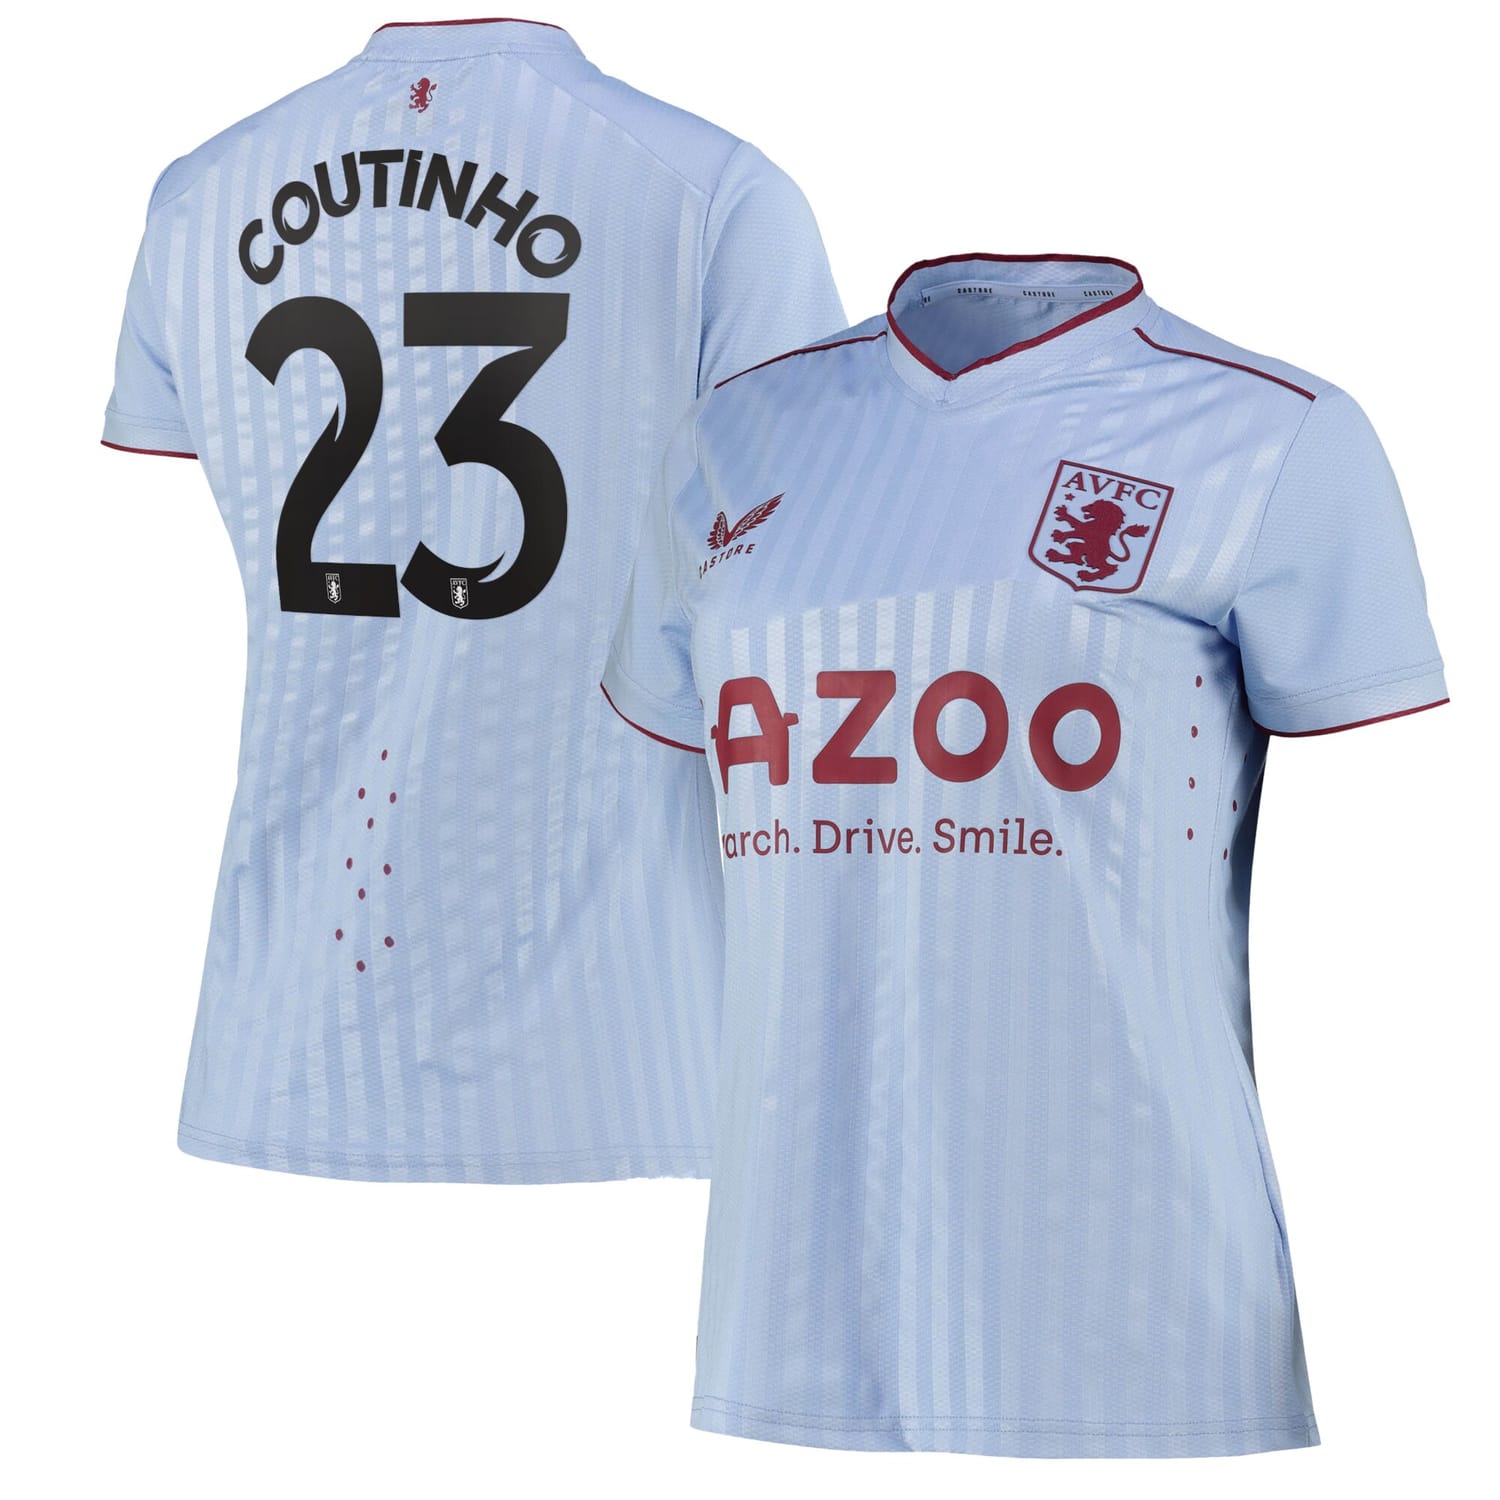 Premier League Aston Villa Away Cup Pro Jersey Shirt 2022-23 player Philippe Coutinho 23 printing for Women